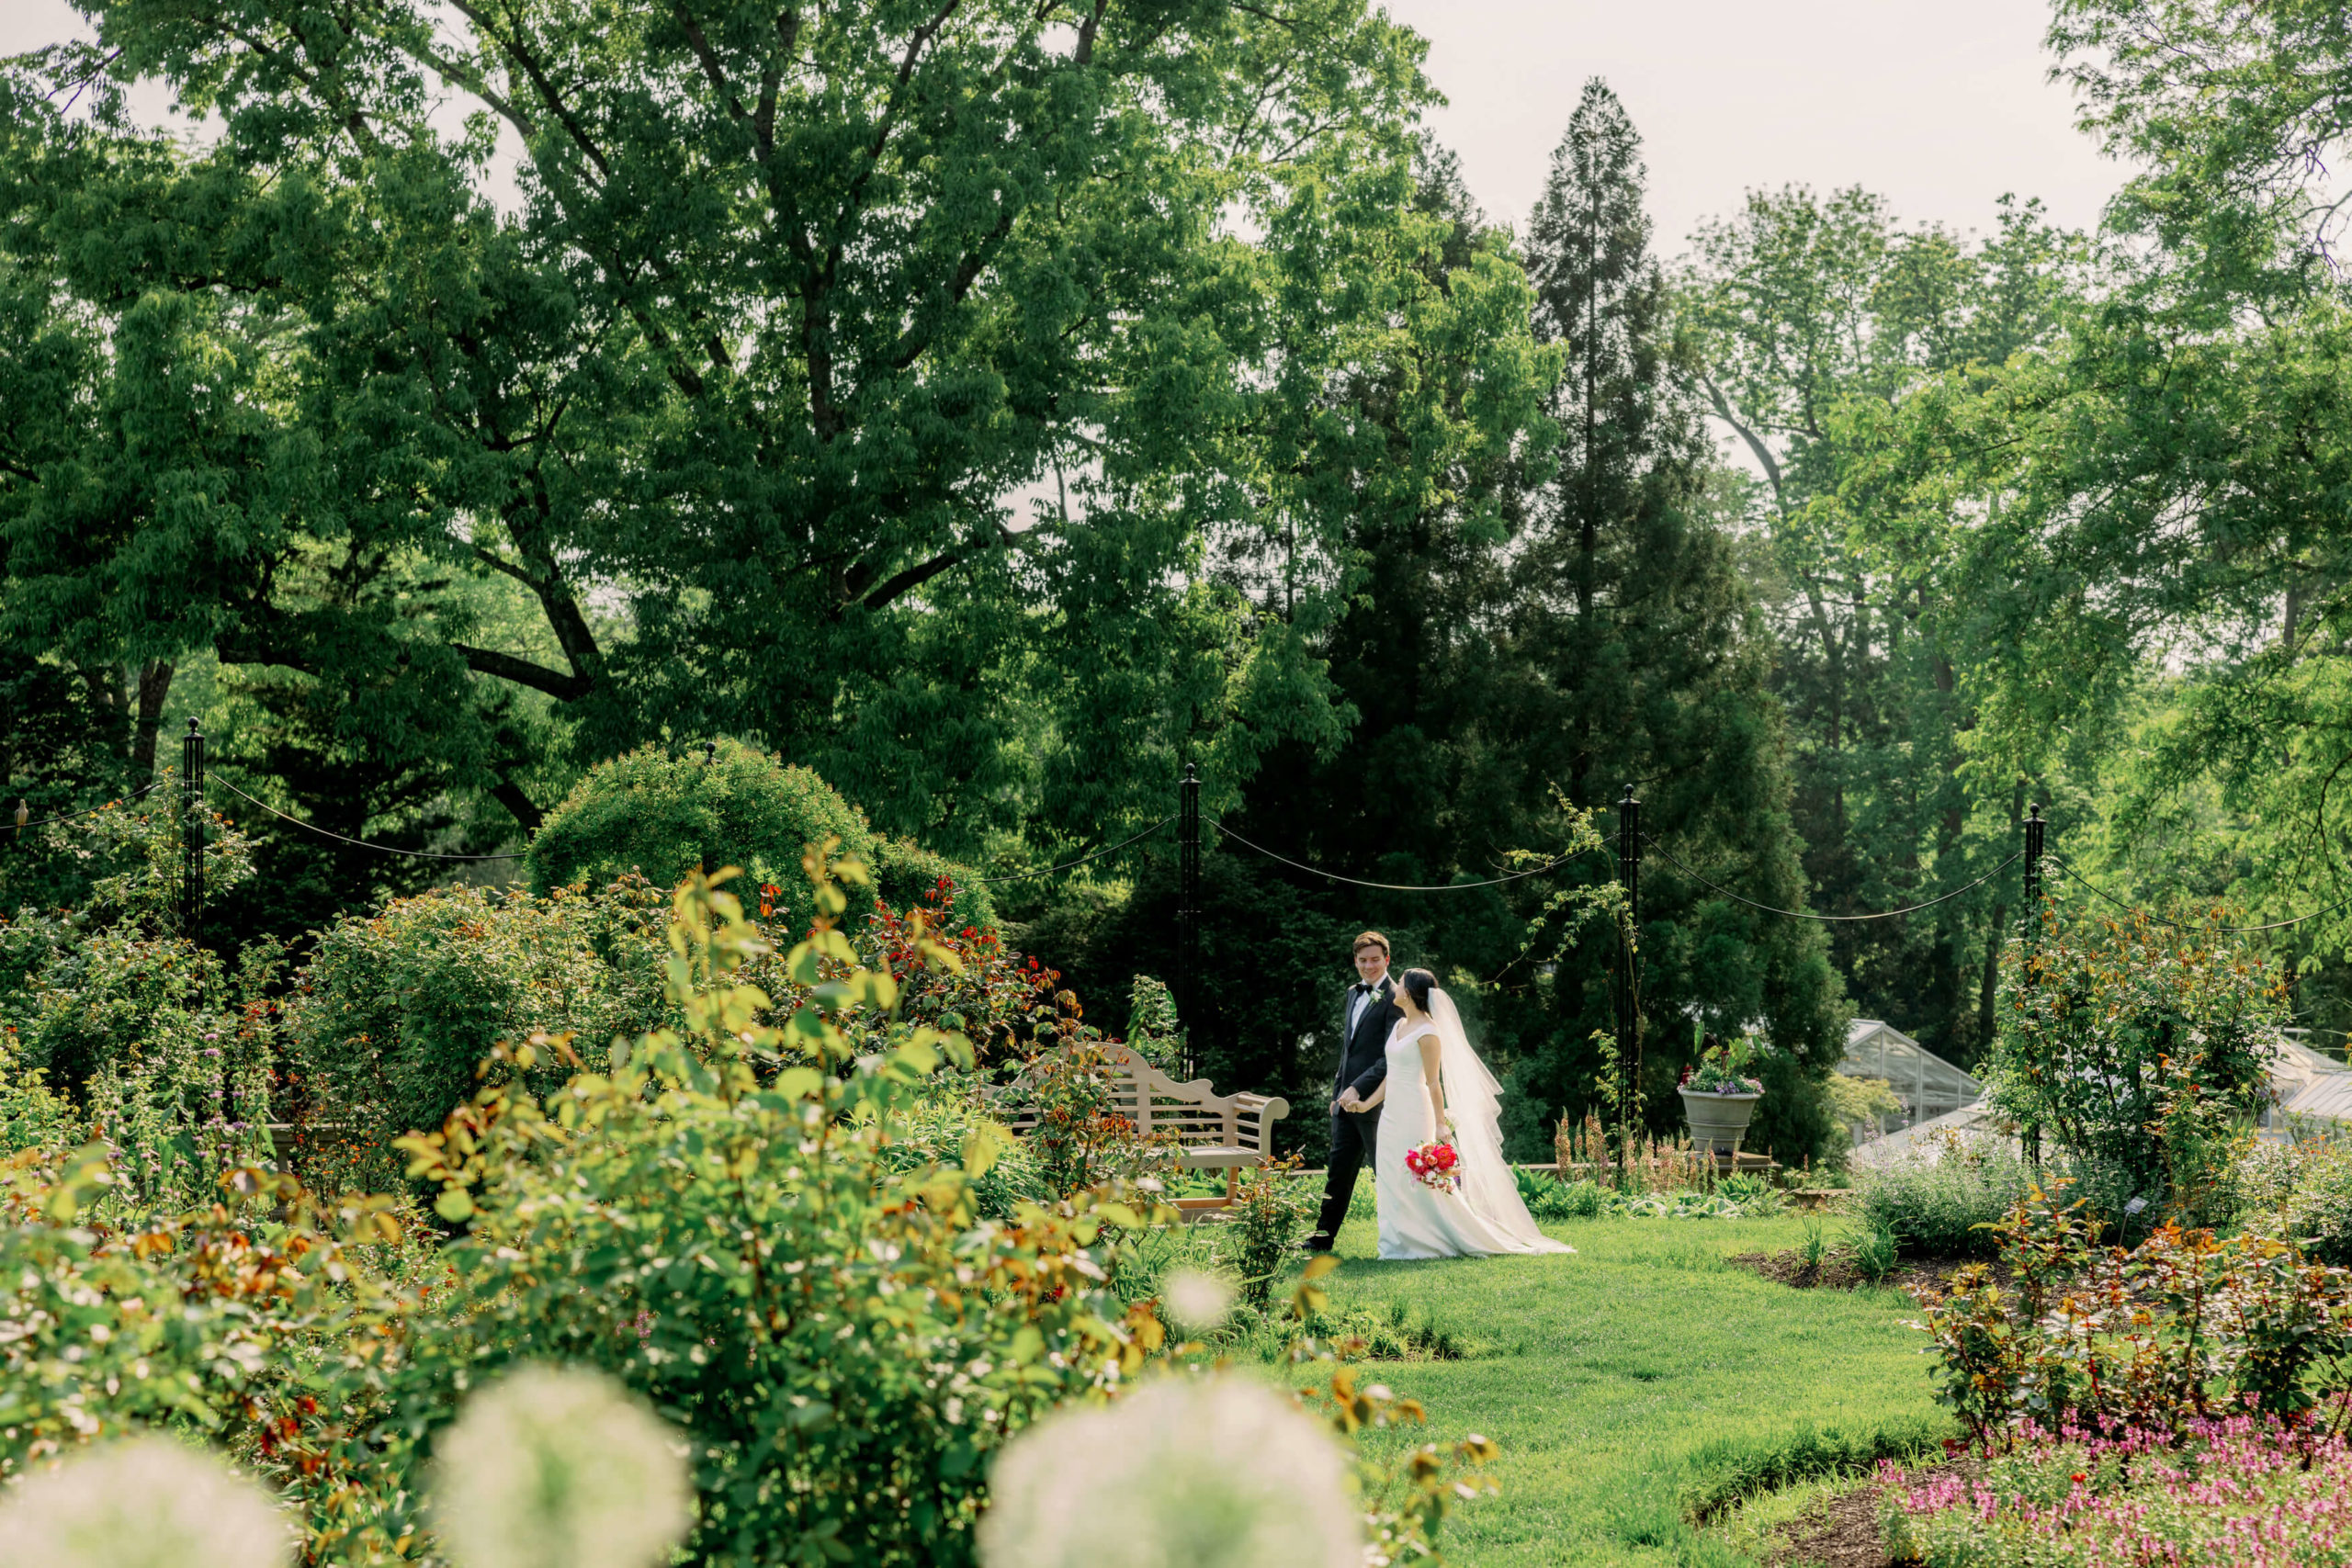 The bride and groom are walking hand in hand in the middle of lush greens. Destination wedding image by Jenny Fu Studio